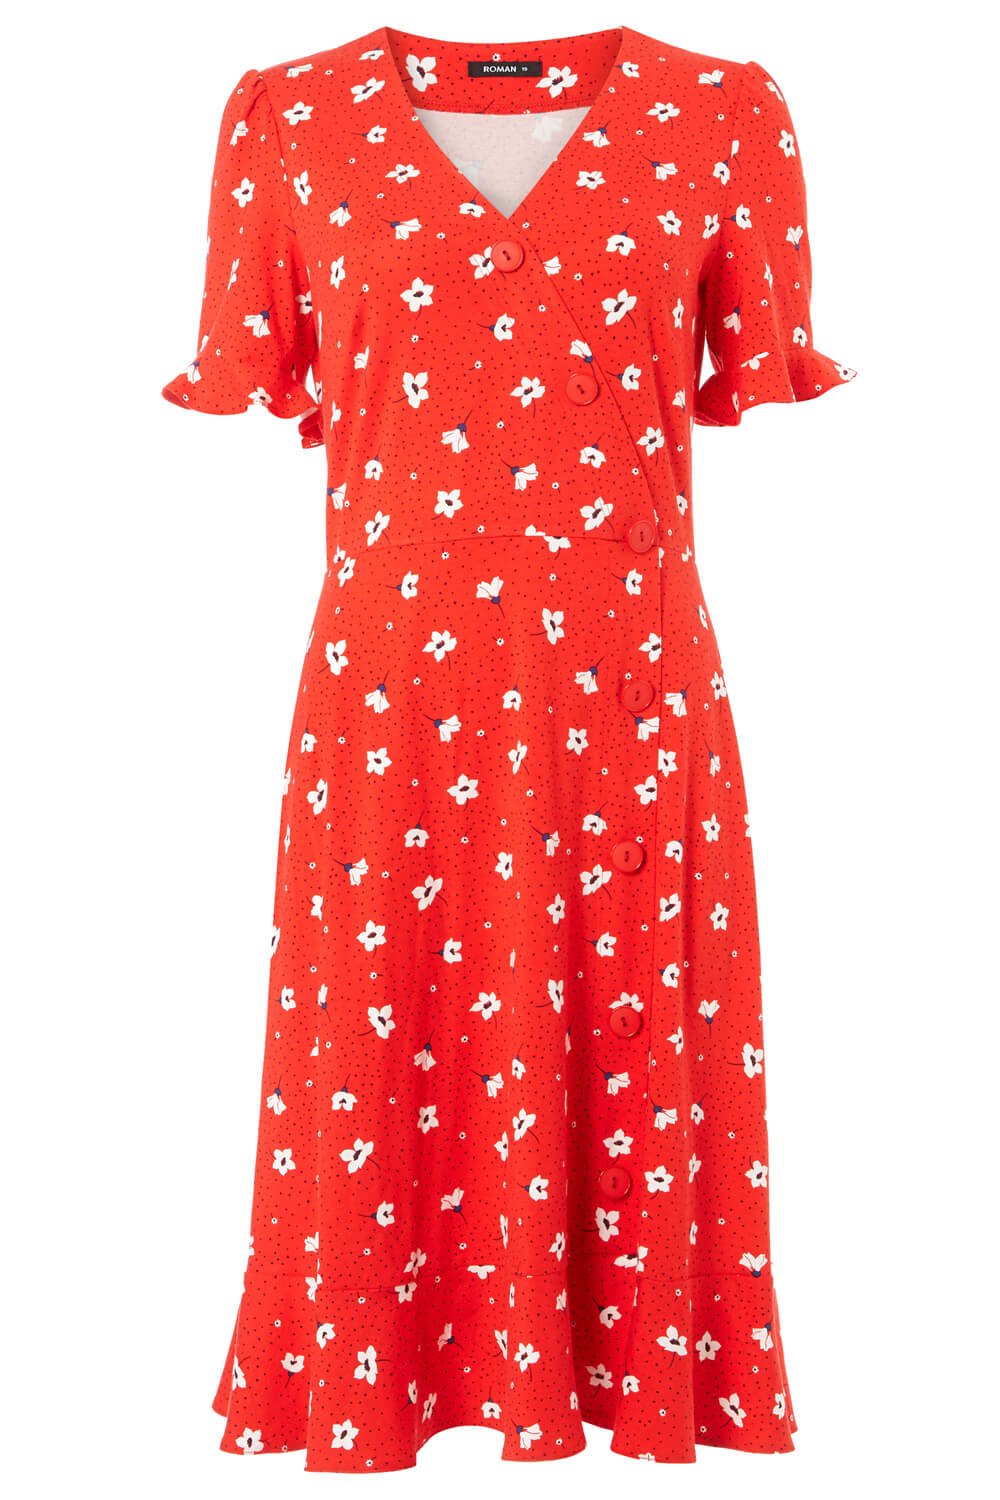 Red Floral Stretch Jersey Tea Dress, Image 6 of 6